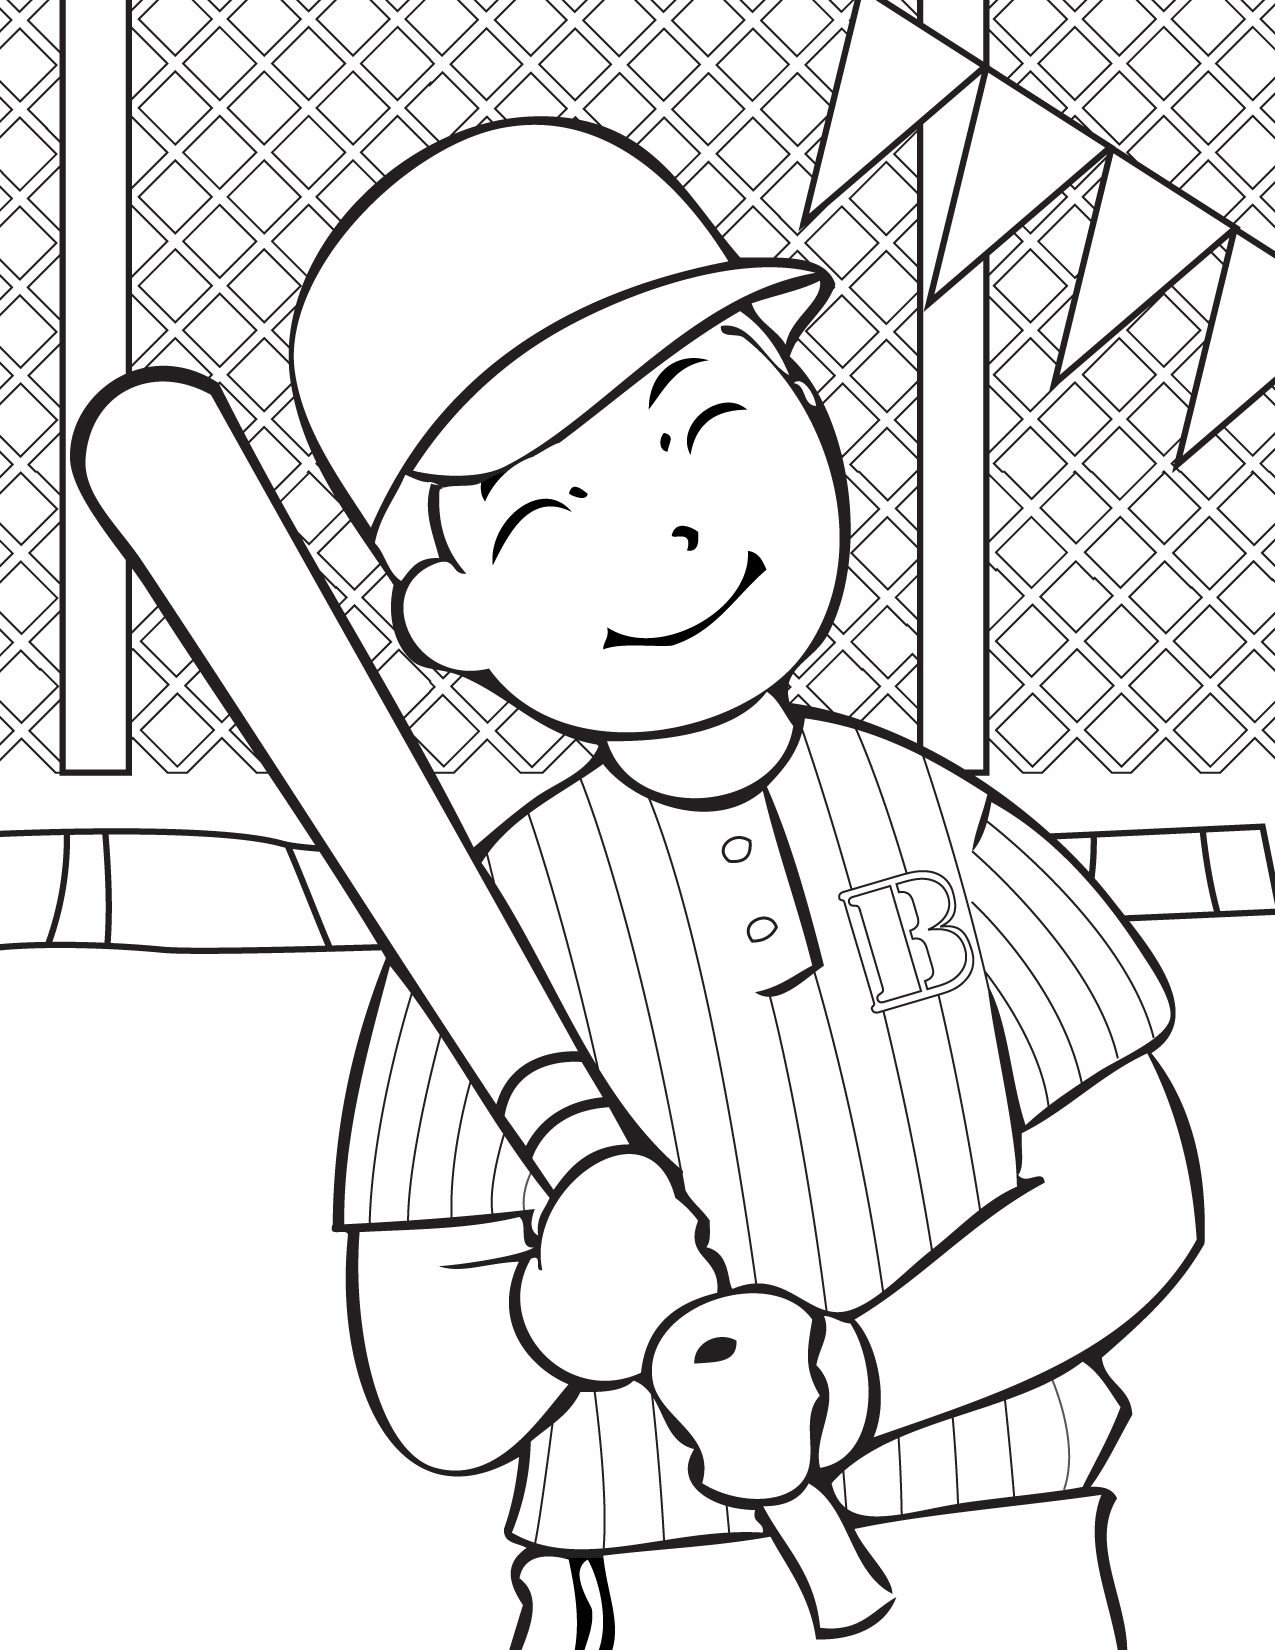 Baseball Coloring Pages (15) - Coloring Kids